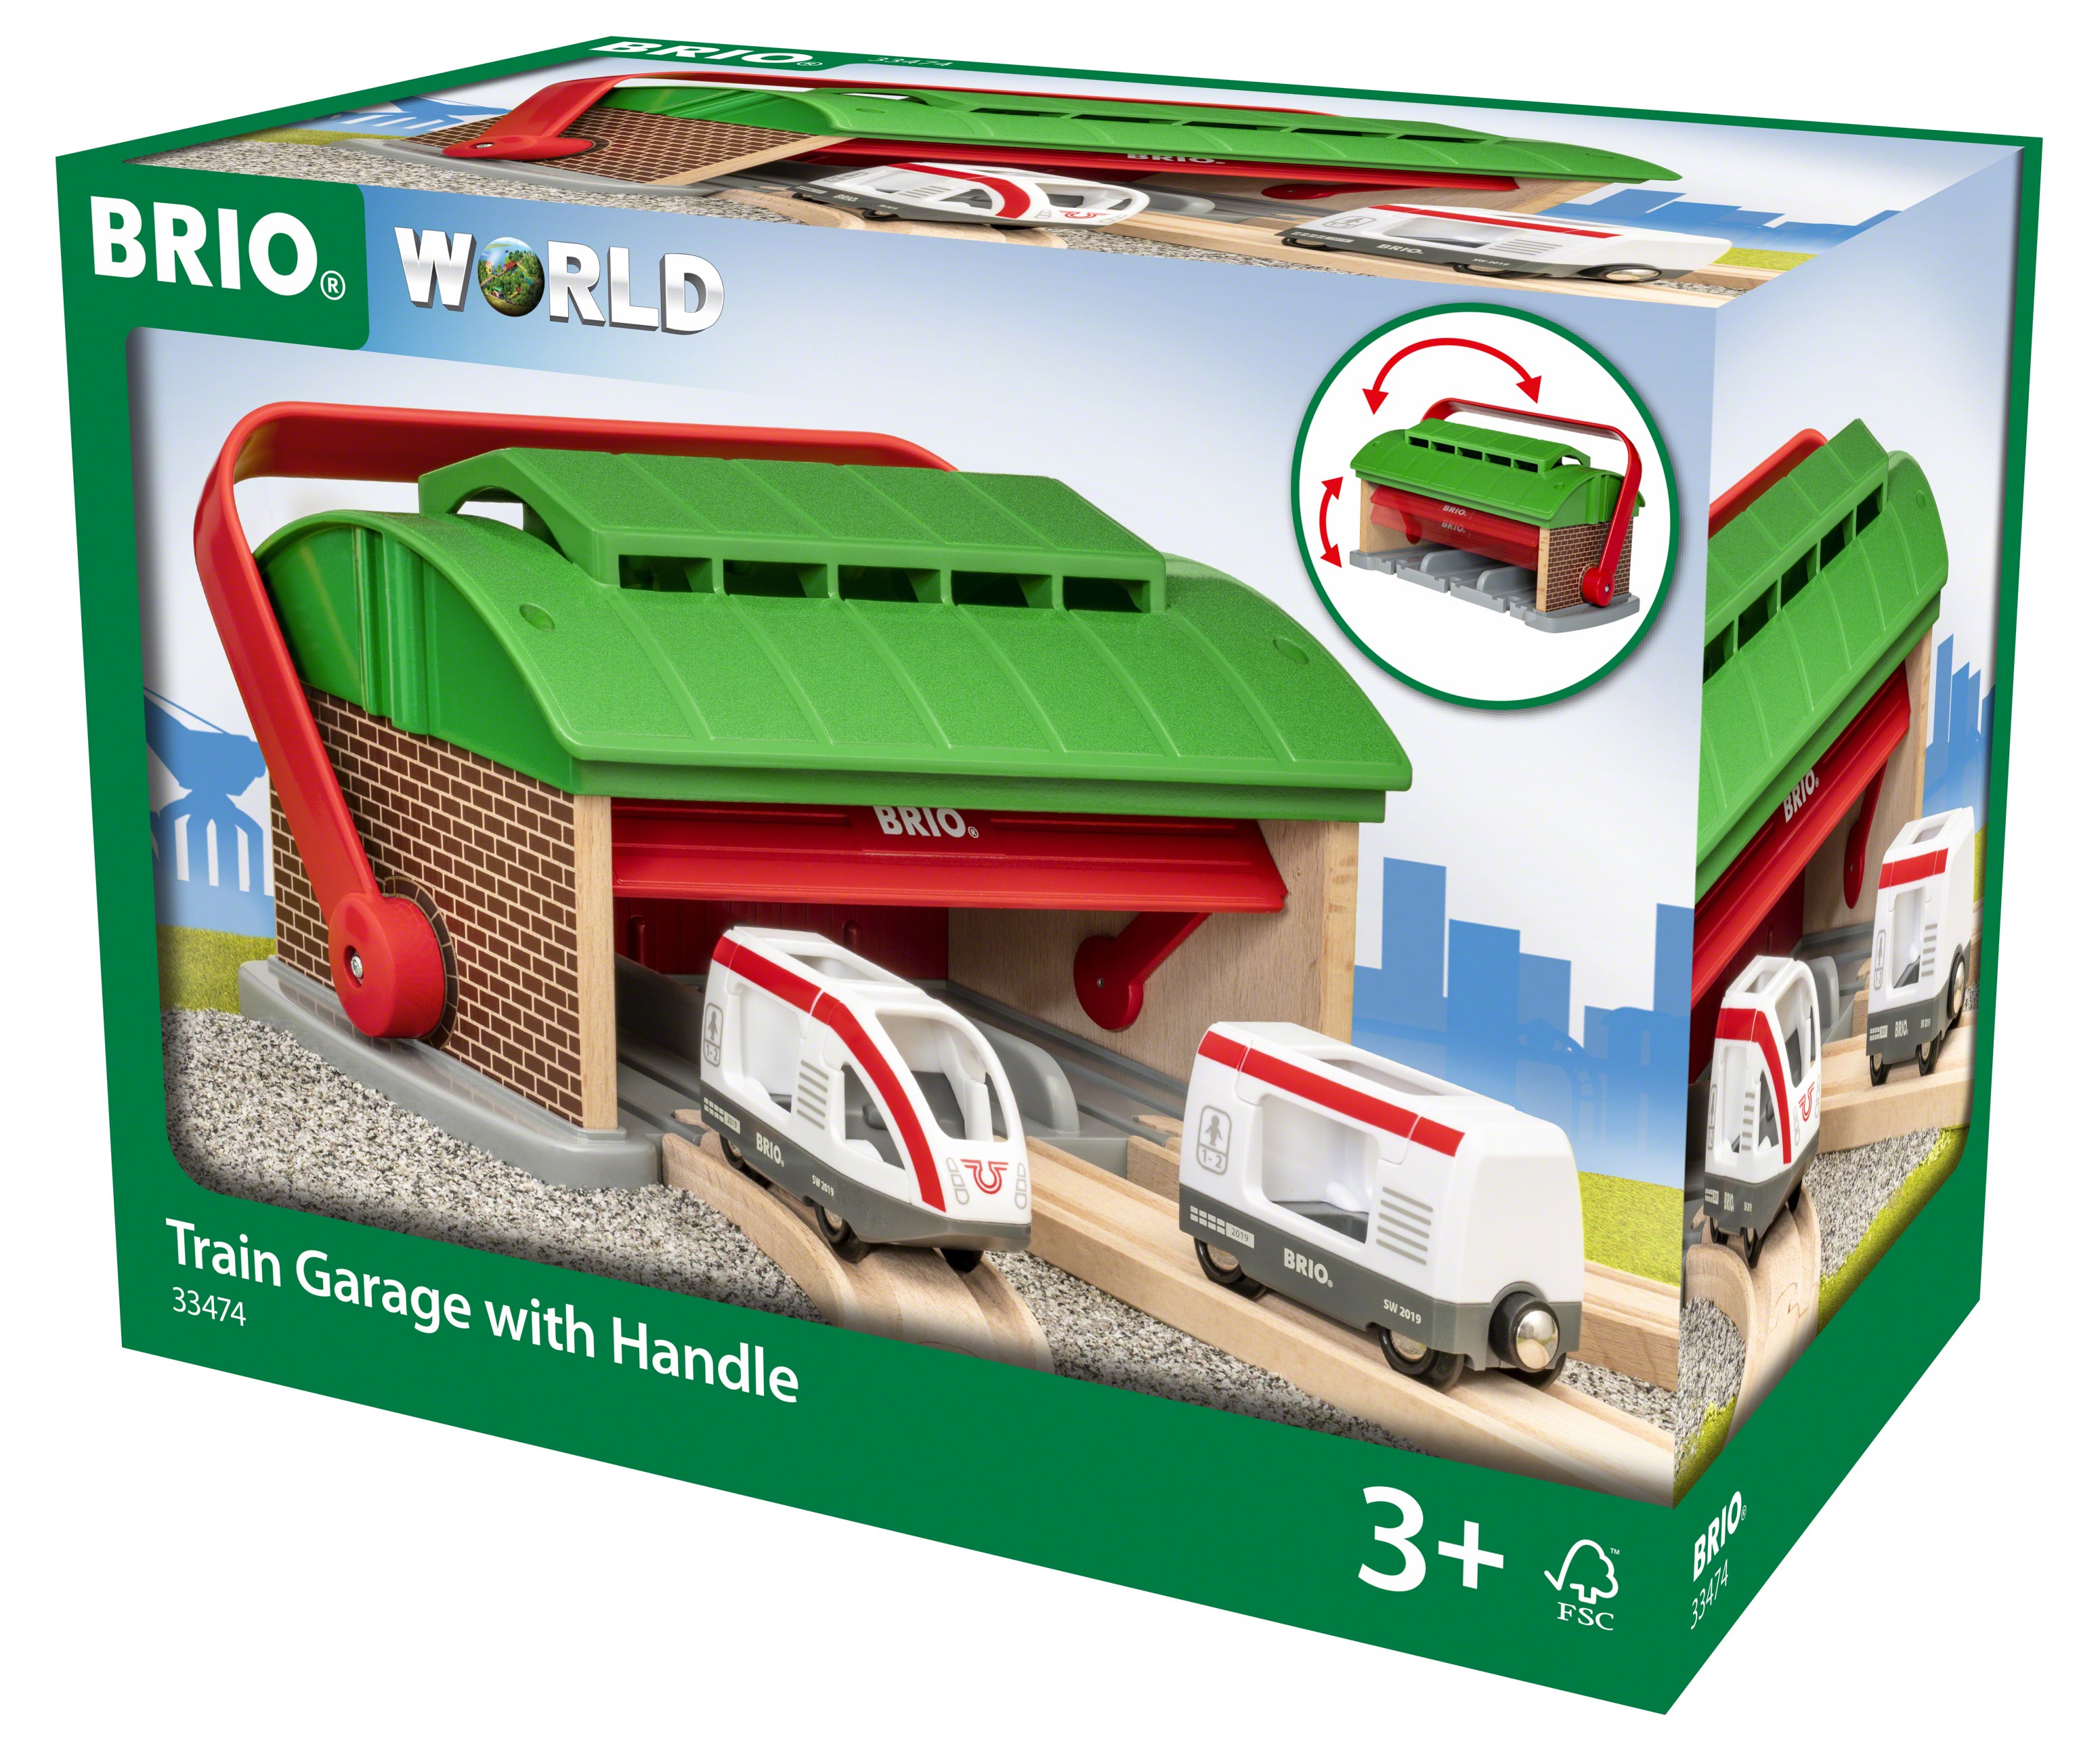 33474 BRIO Train Garage with Carry Handle Wooden Plastic Railway Age 3 Year+